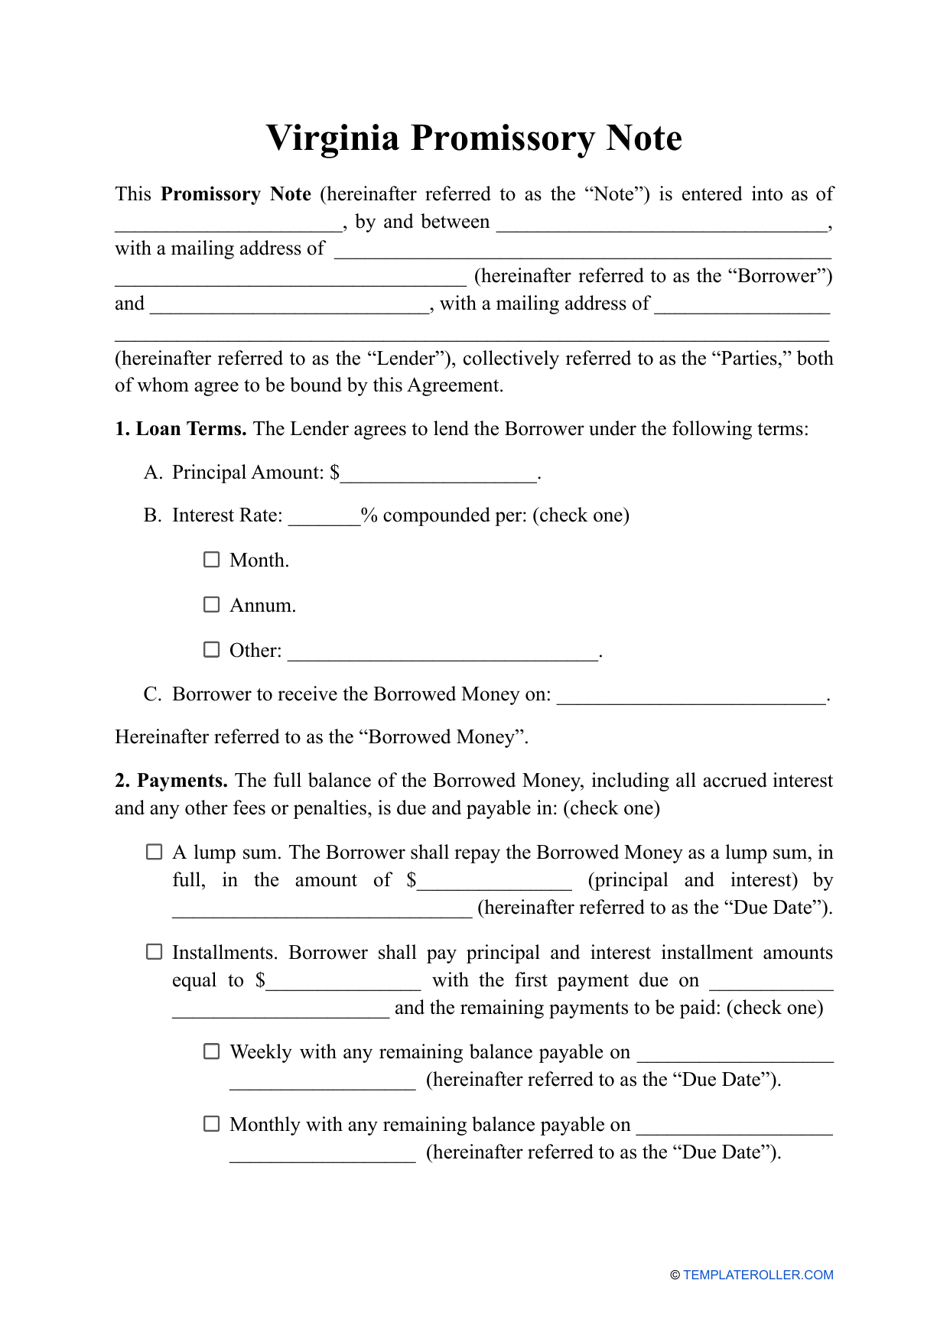 Virginia Promissory Note Template Fill Out Sign Online and Download